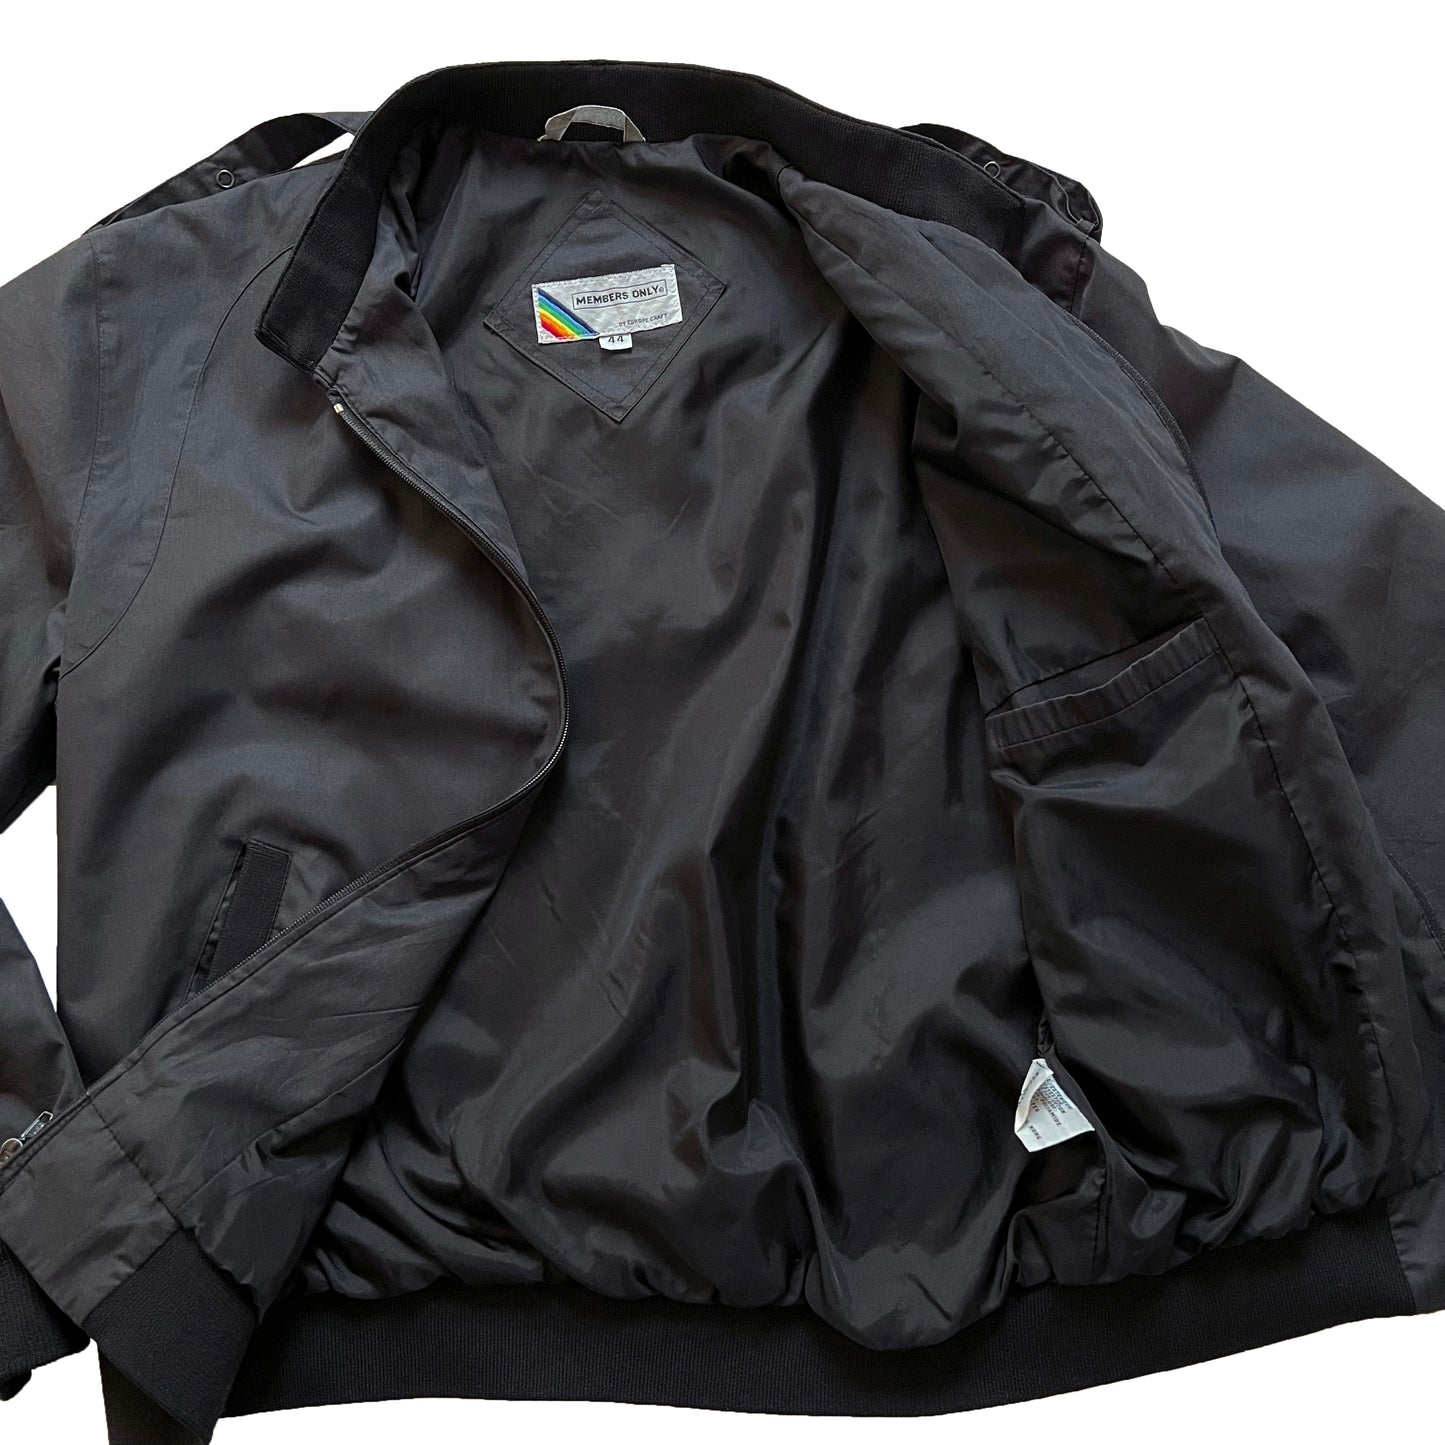 80's MEMBERS ONLY T/C SINGLE RIDERS JACKET